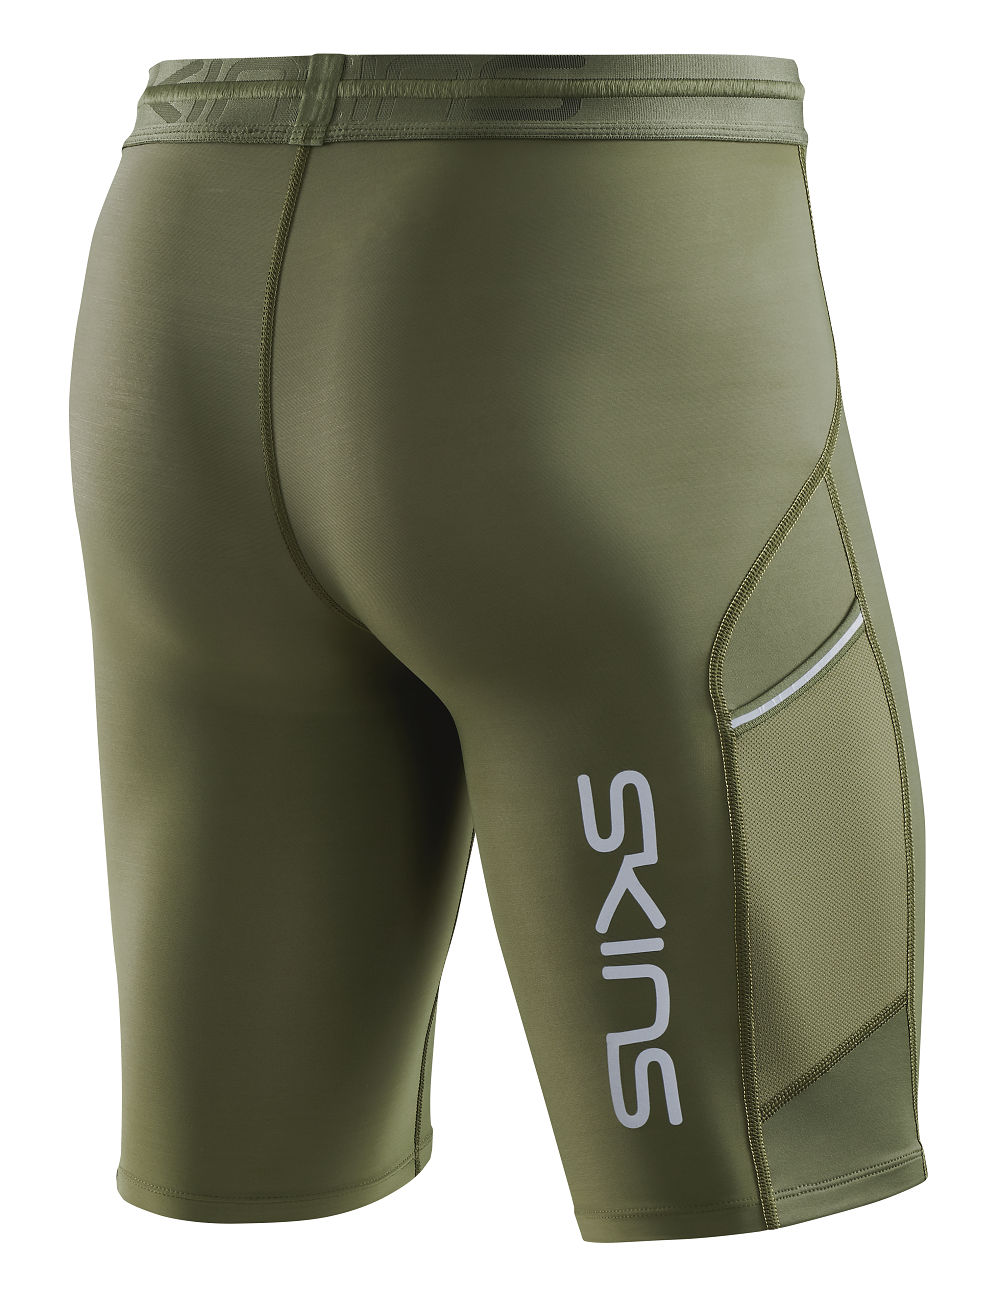 SKINS Men's Compression 400 Long Tights 3-Series - Black/Yellow – Key Power  Sports Malaysia